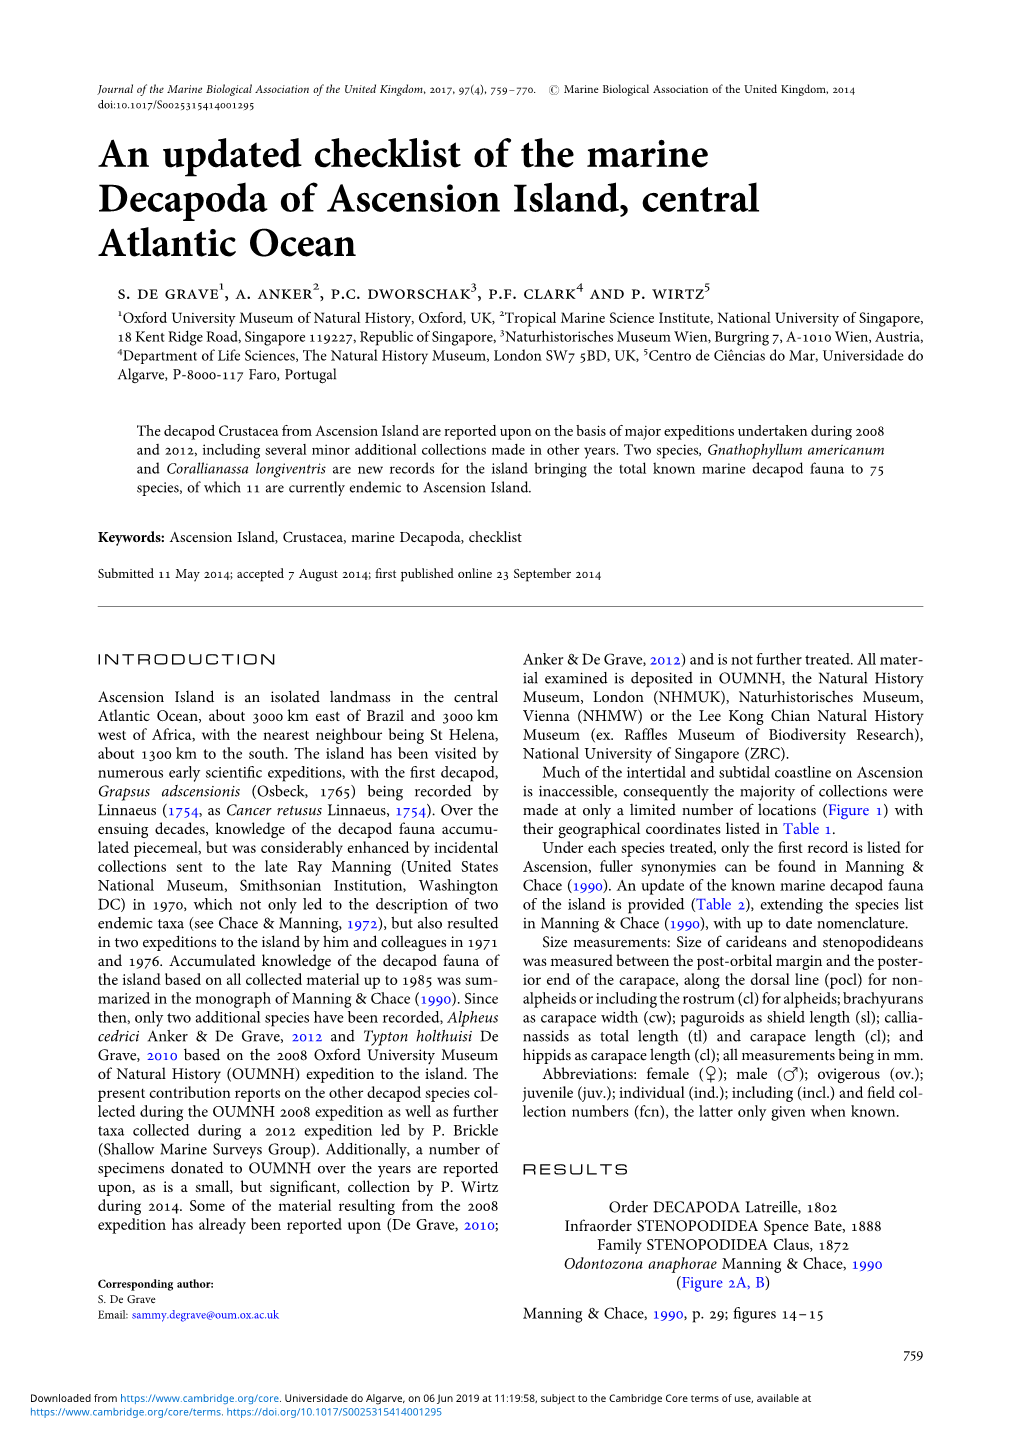 An Updated Checklist of the Marine Decapoda of Ascension Island, Central Atlantic Ocean S